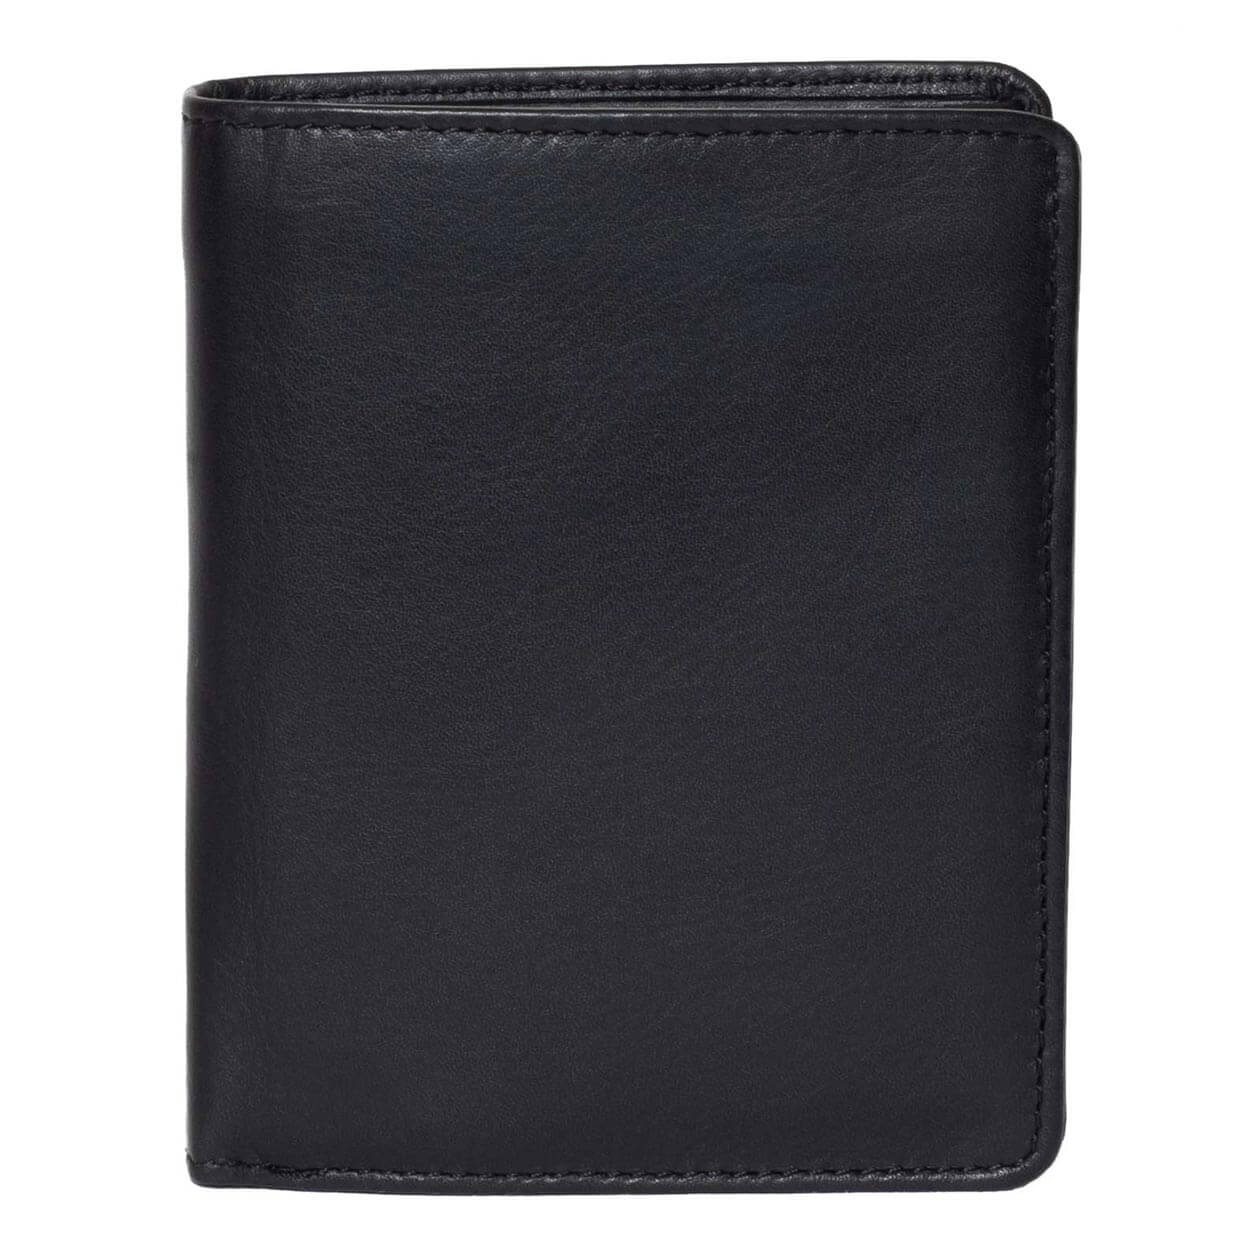 DiLoro Men's Vertical Leather Bifold Flip ID Zip Coin Wallet Black with RFID Protection  - Front View